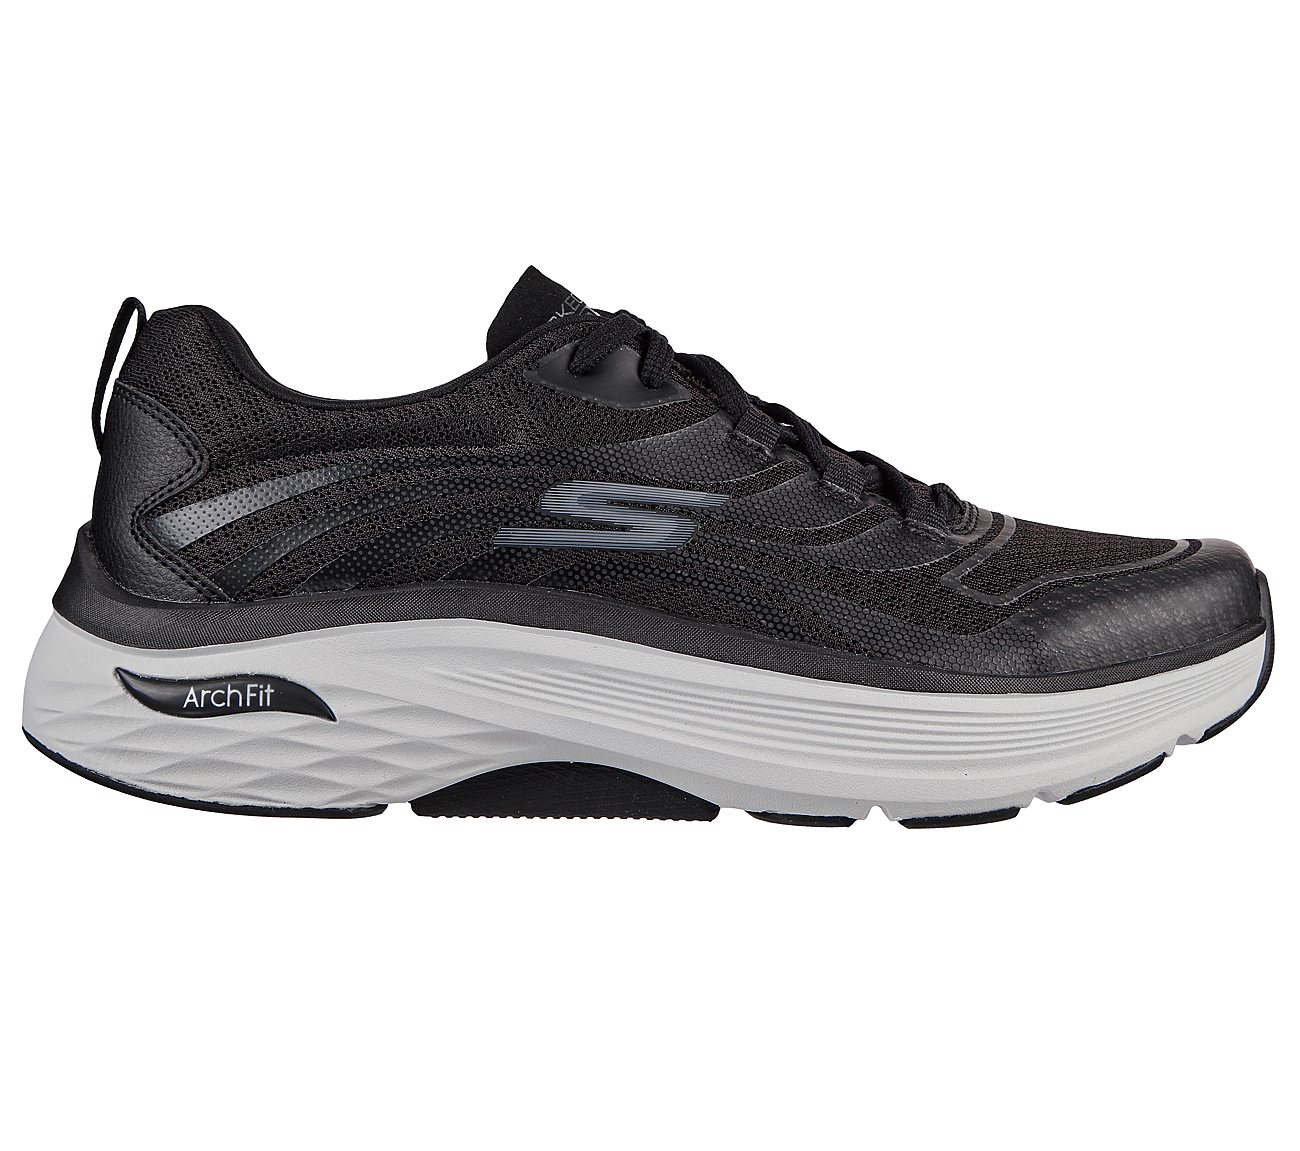 Skechers Black/Grey Max Cushioning Arch Fit Enig Mens Lace Up Shoes ...